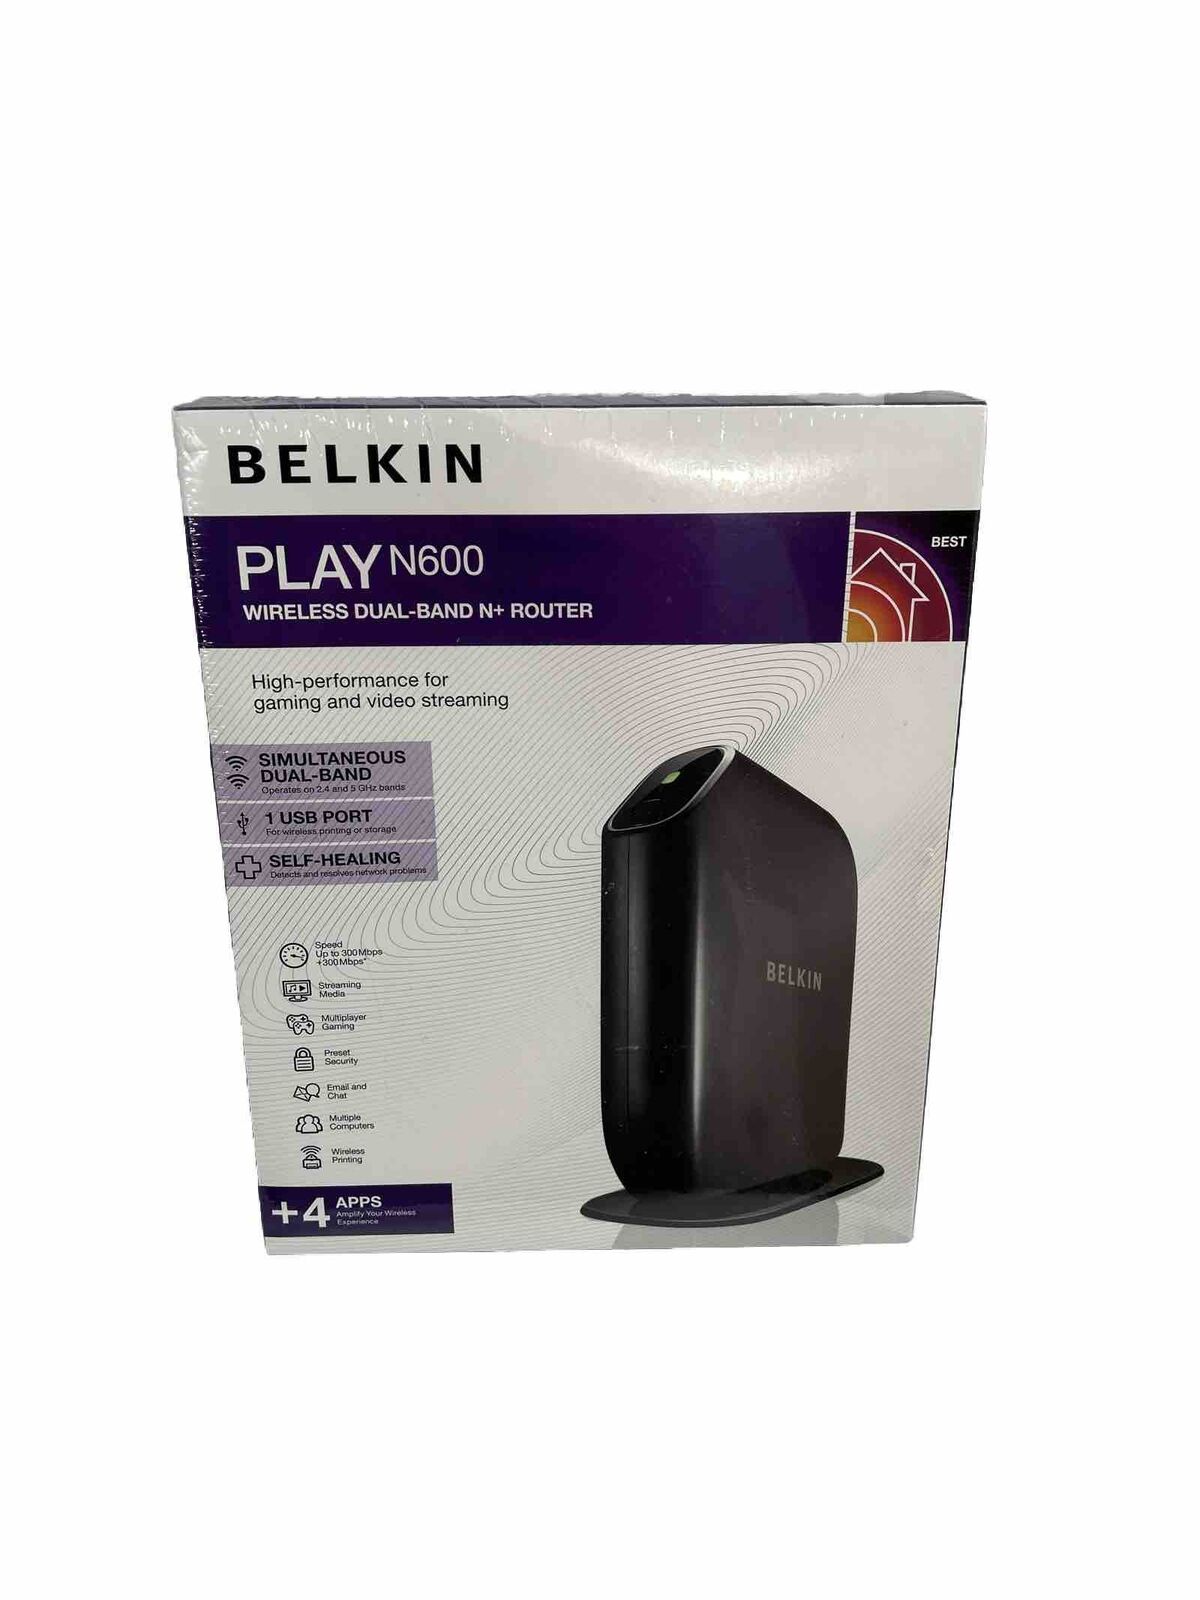 Belkin F7D8302 Play N600 300 Mbps 1-Port 10/100 Wireless N Router NEW & SEALED